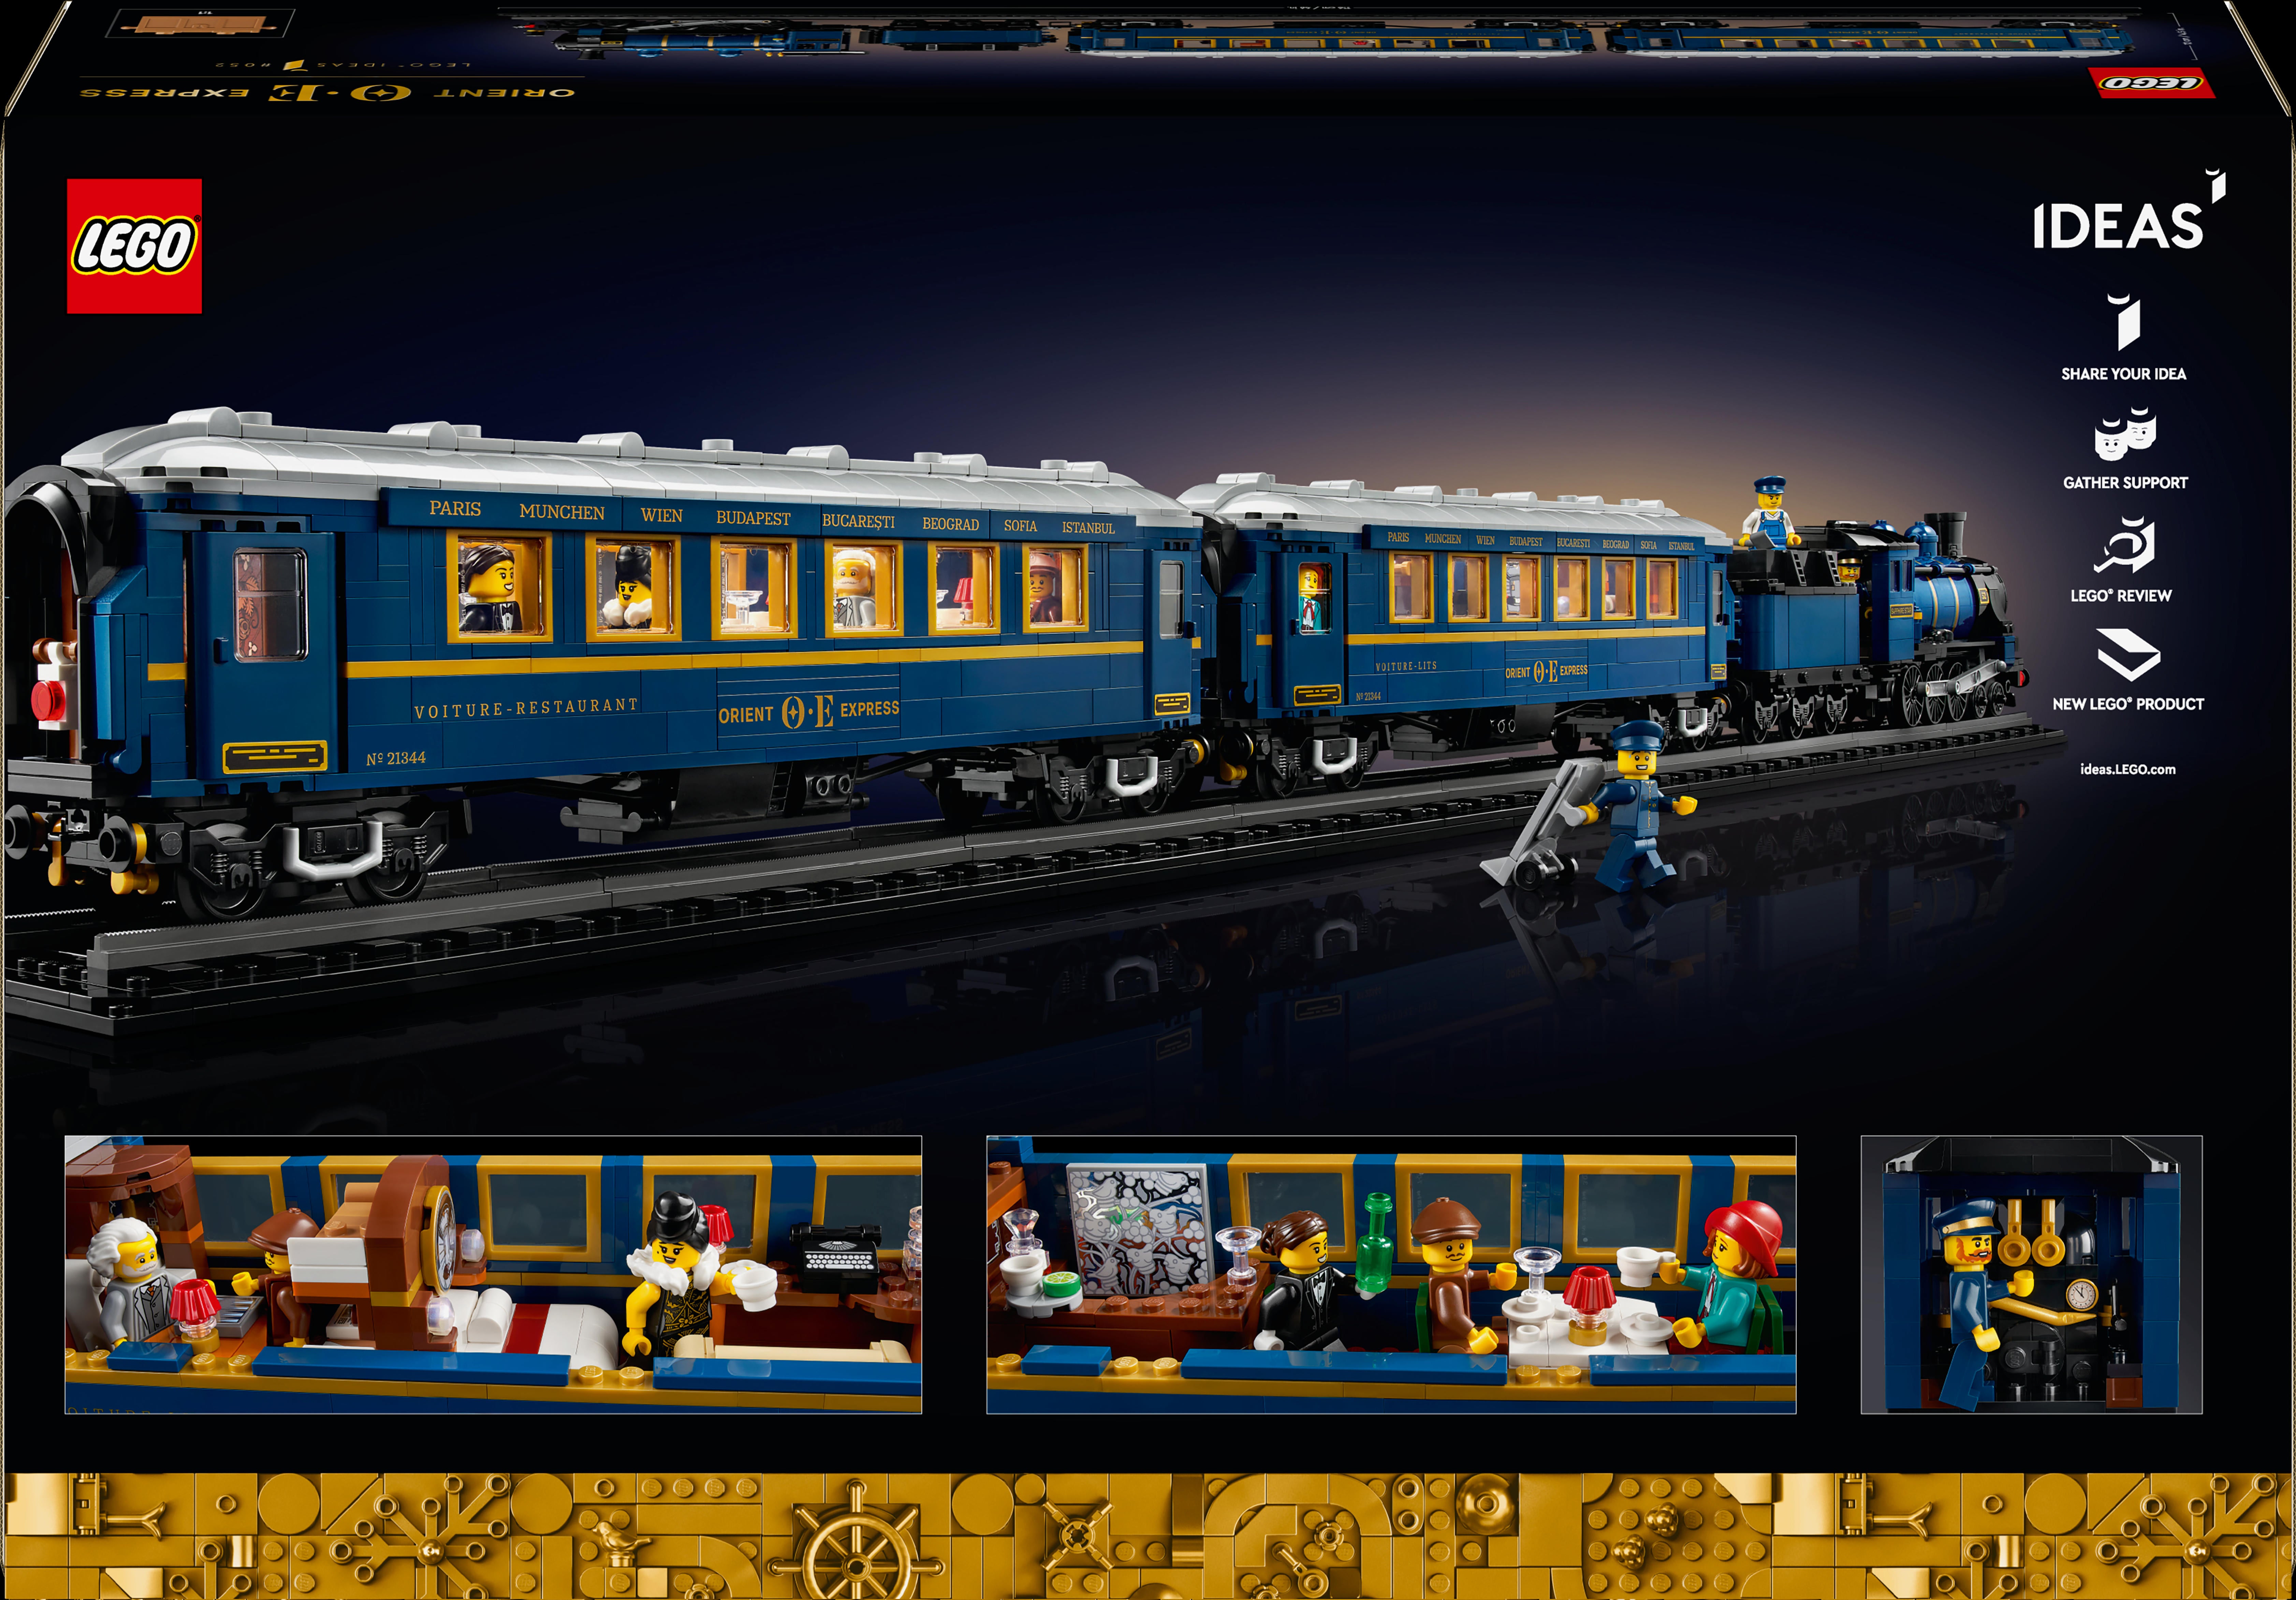 The LEGO Ideas Orient Express is Scheduled to Arrive in Your Collection  from December 1st - Jedi News